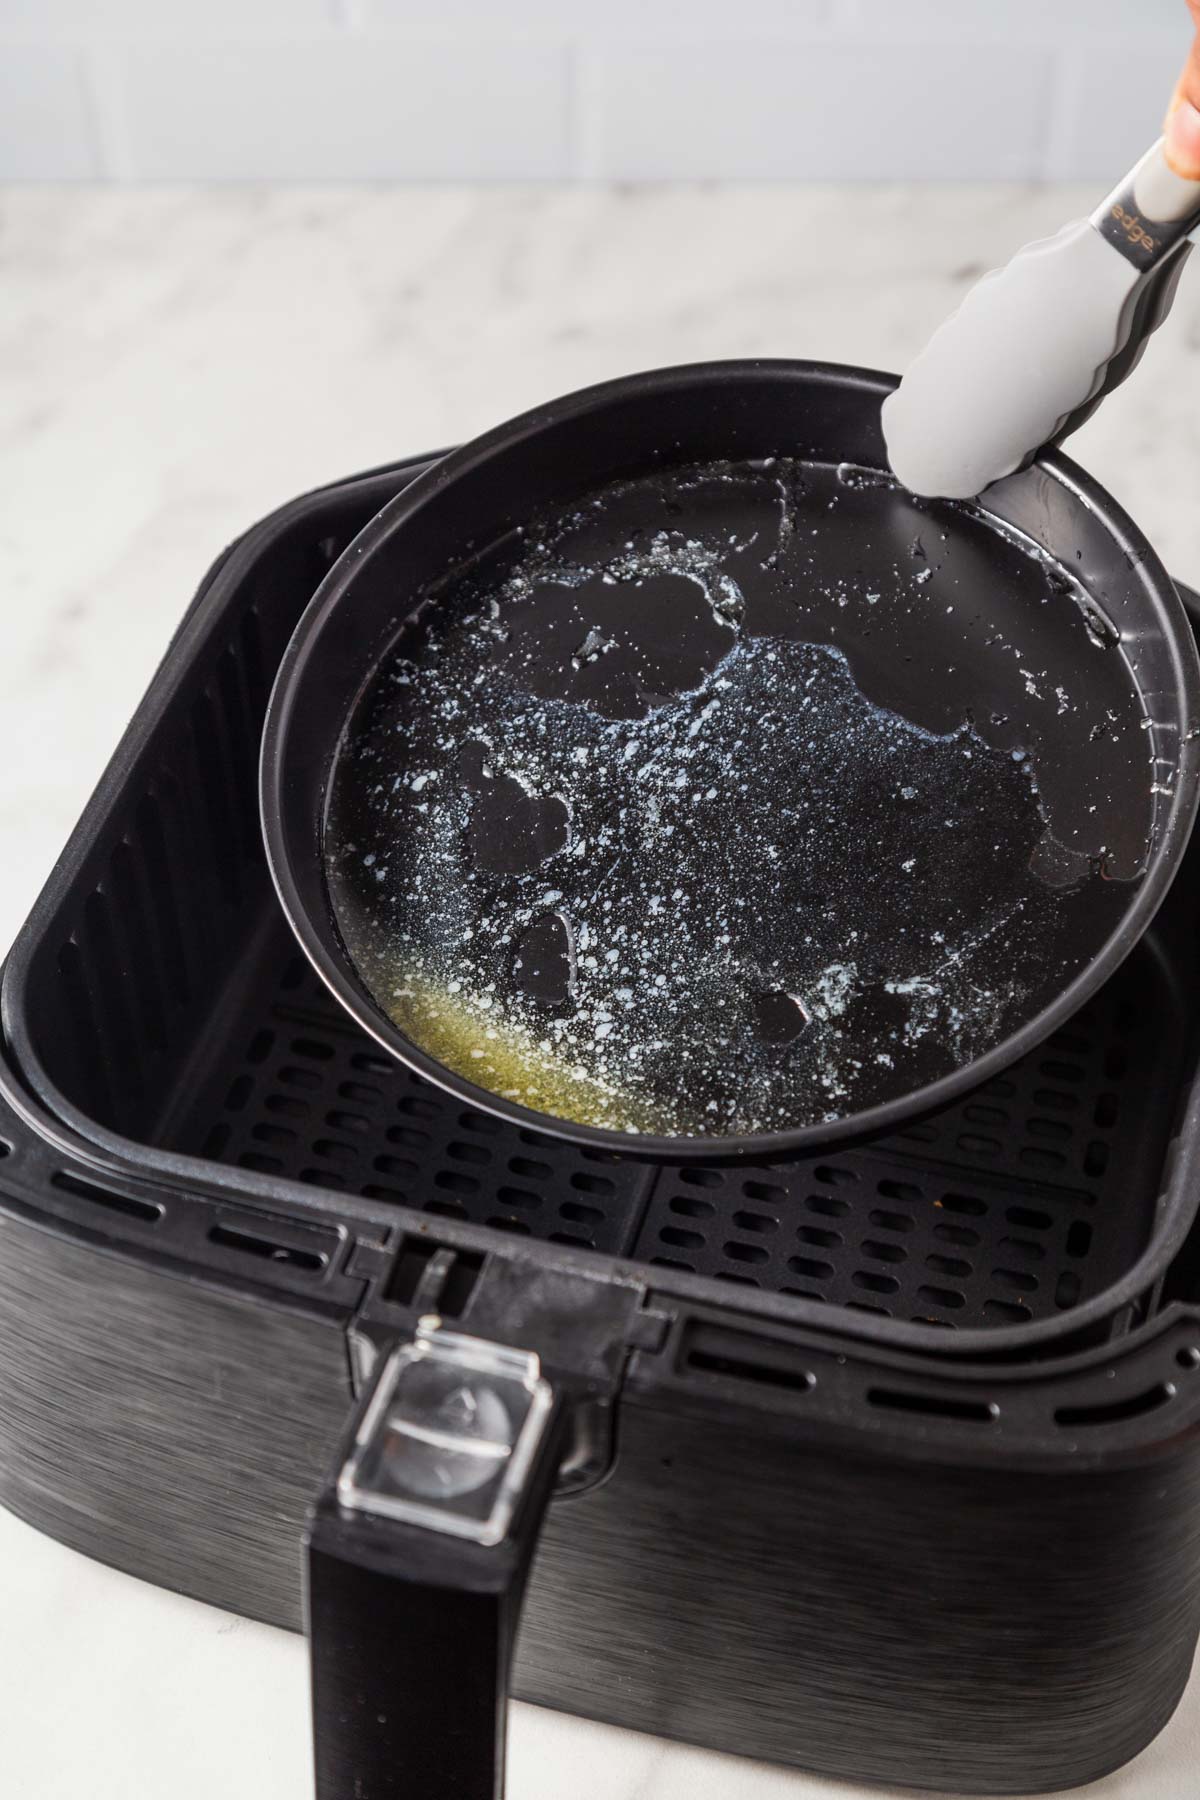 melting butter in the air fryer.